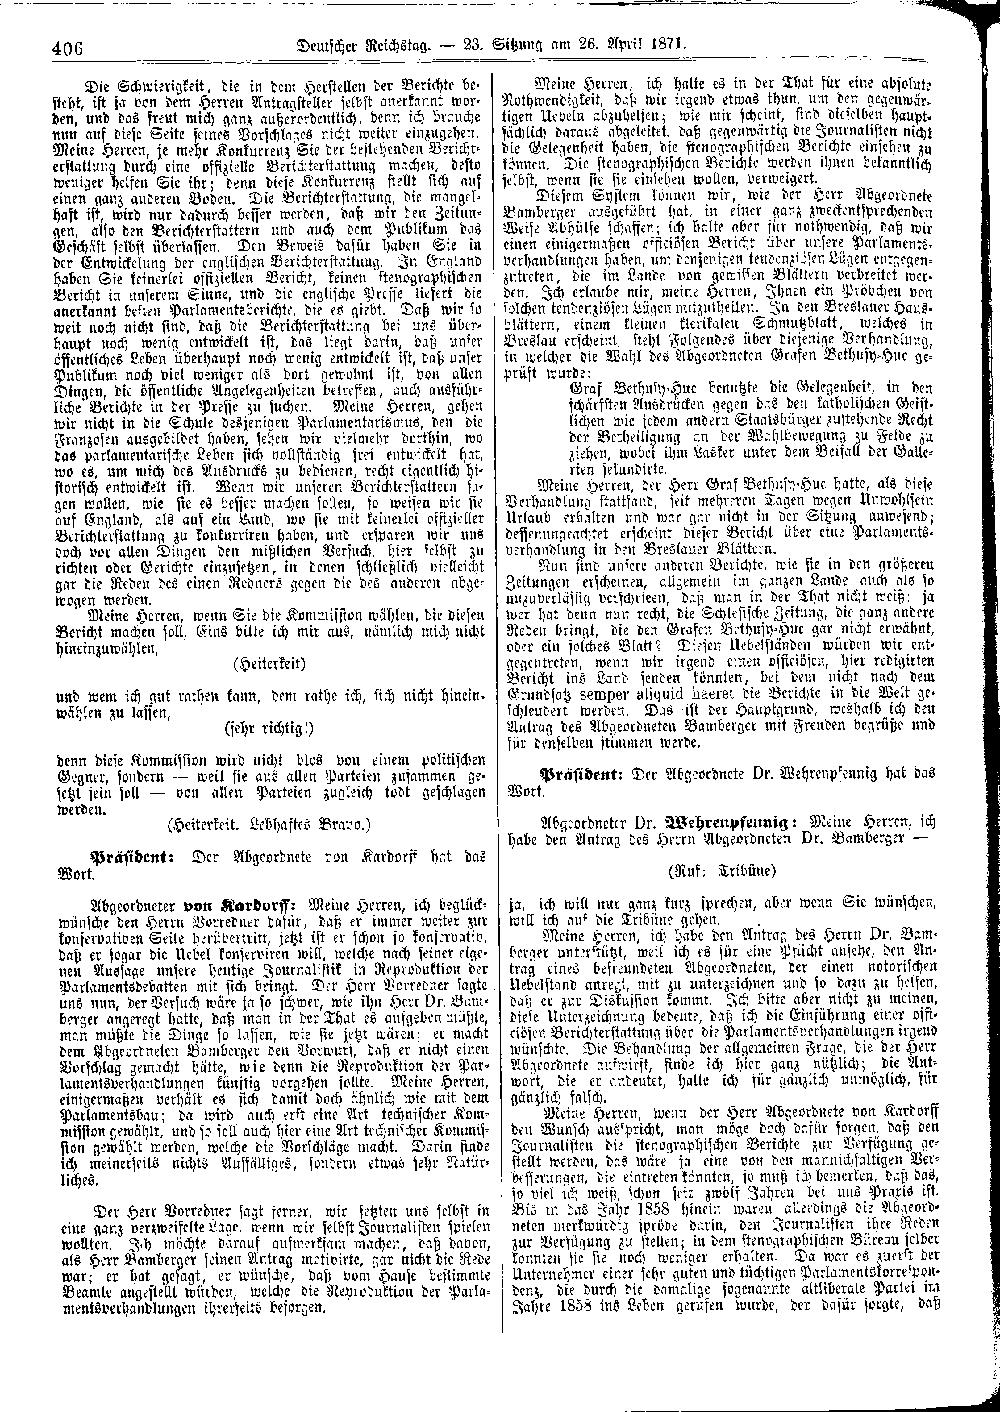 Scan of page 406